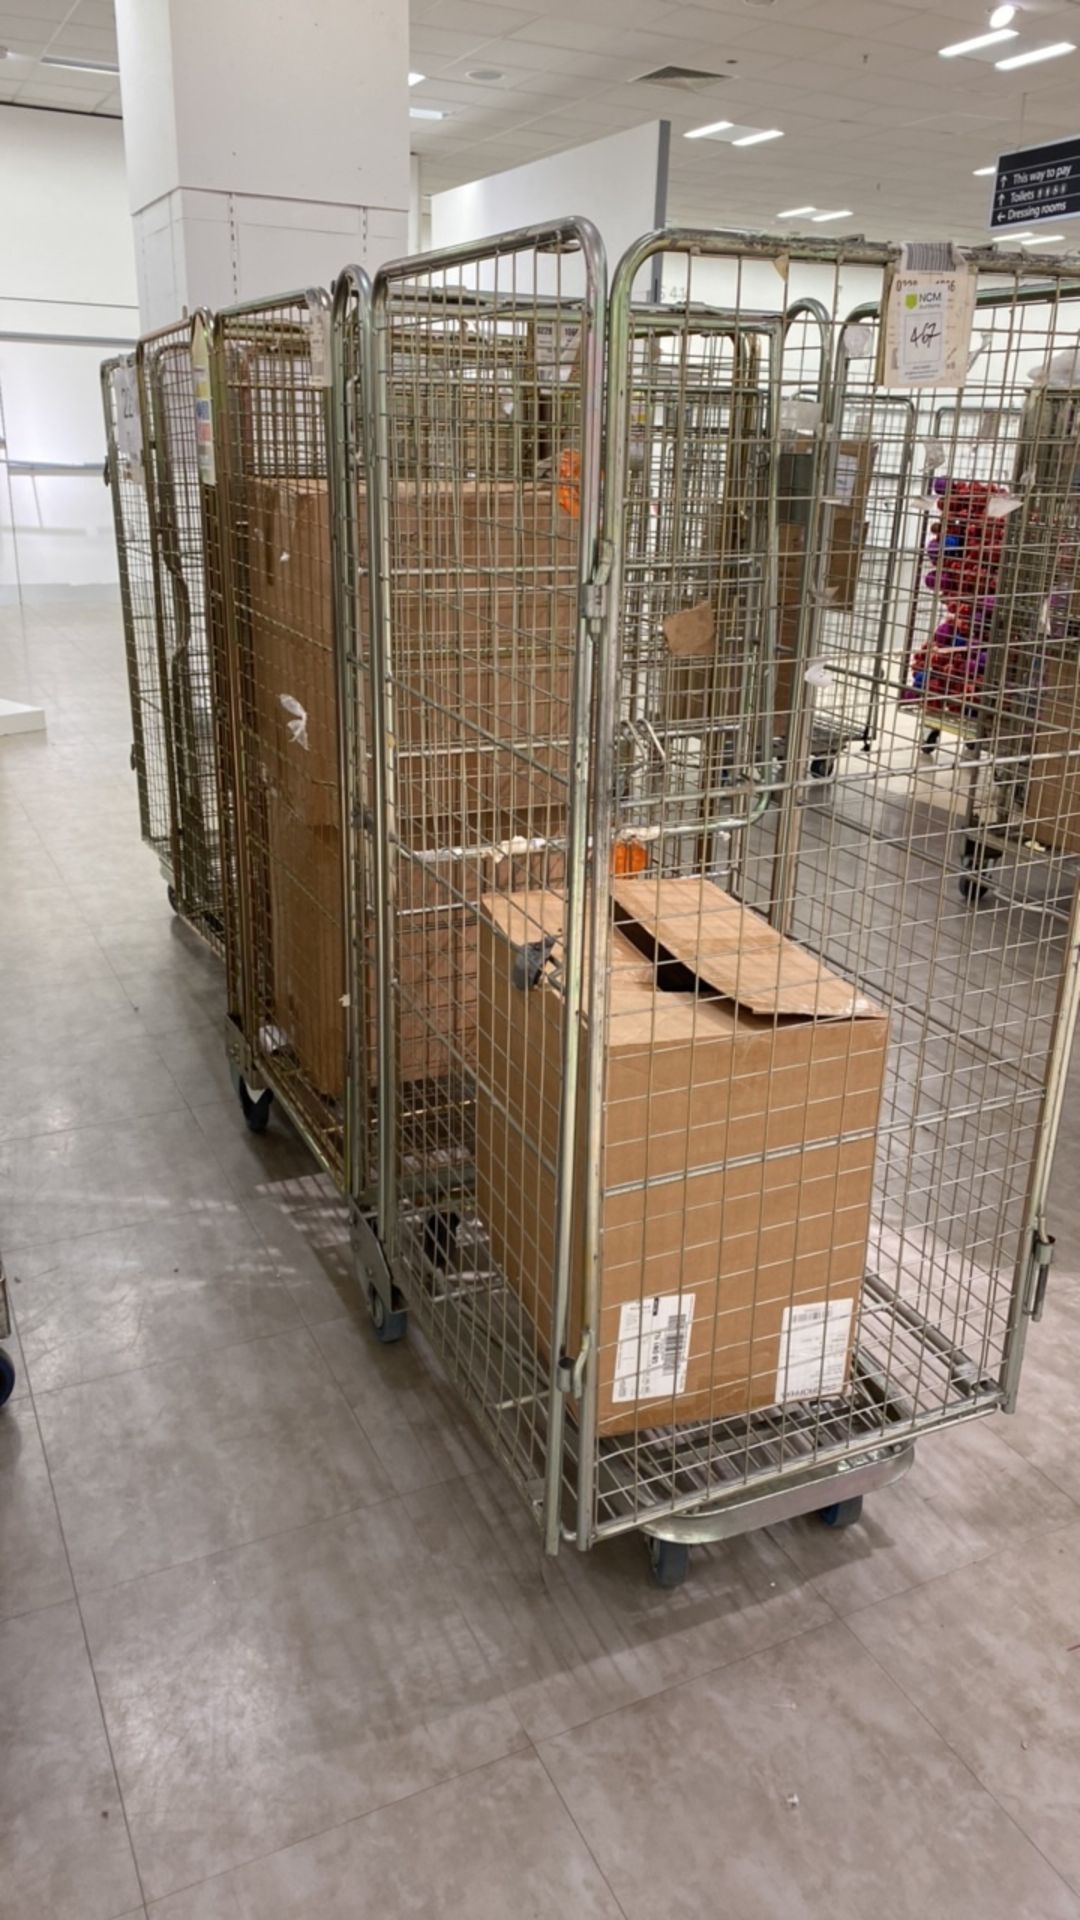 4 x pallet tower storage cage on wheels - Image 2 of 2